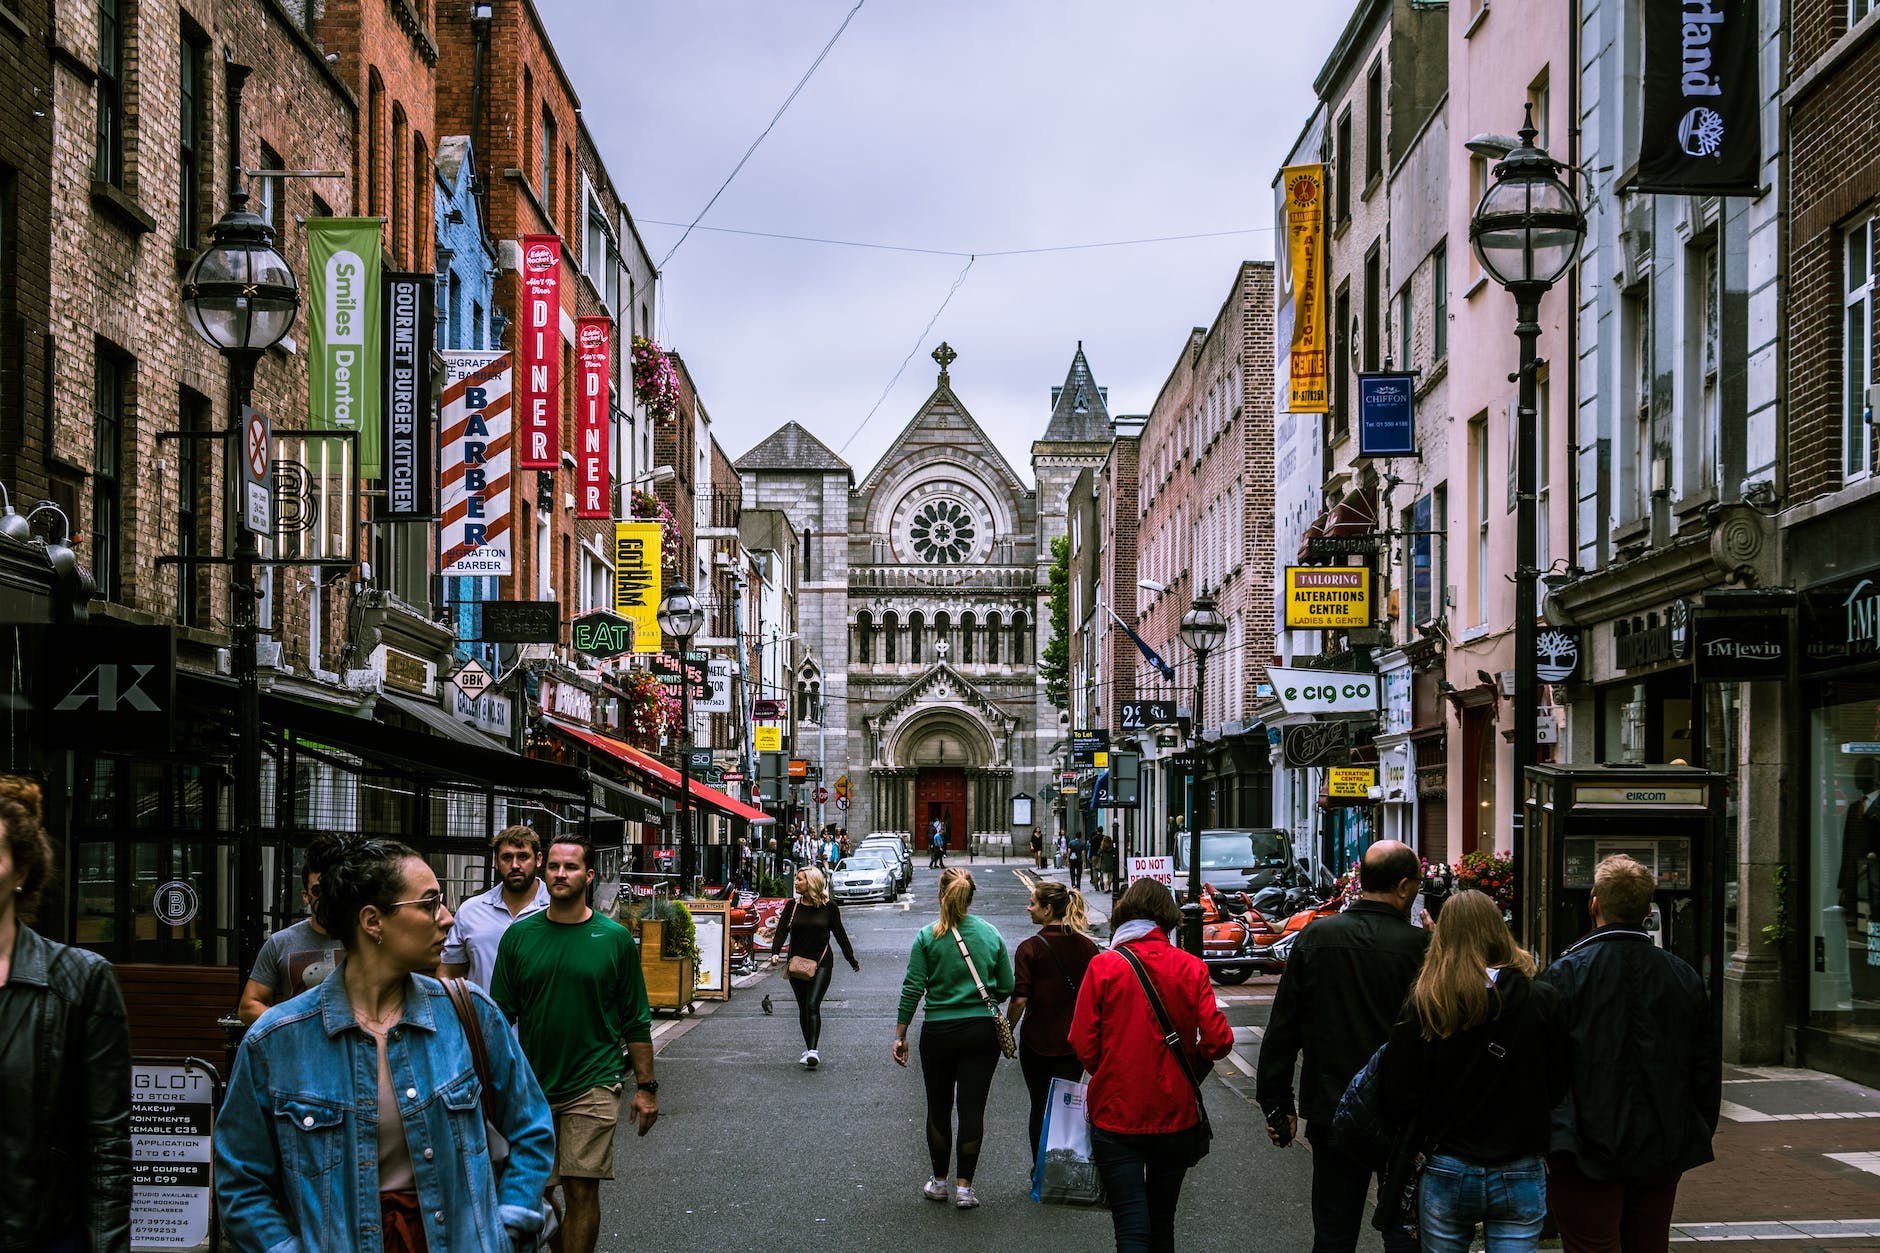 One Day in Dublin: How to Experience the Best of the Capital